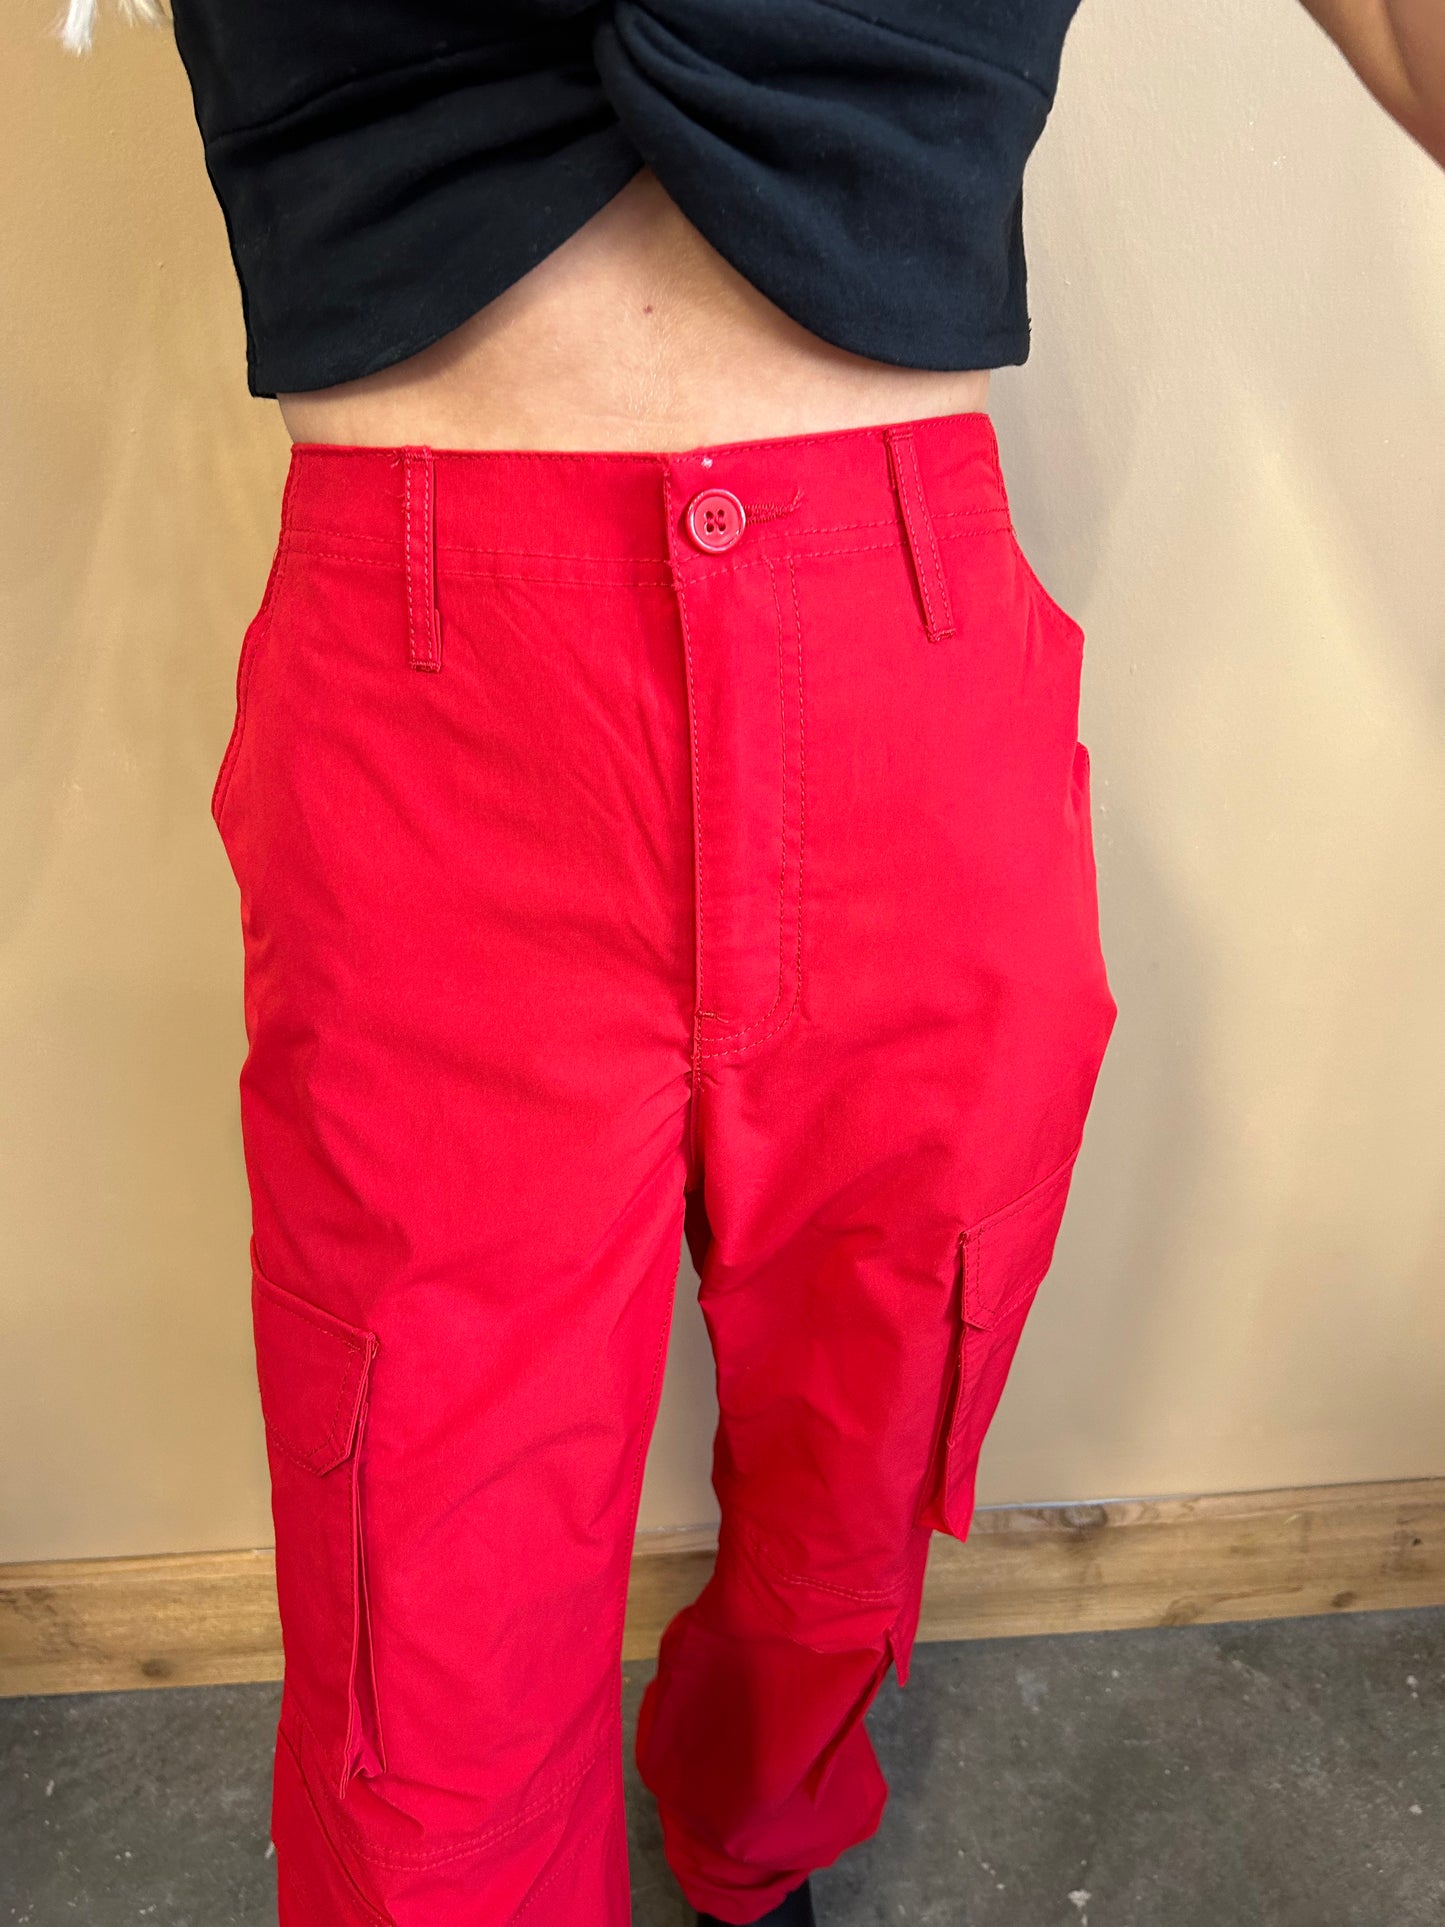 Only 45.00 usd for C4 Cargo Pants - Red Online at the Shop